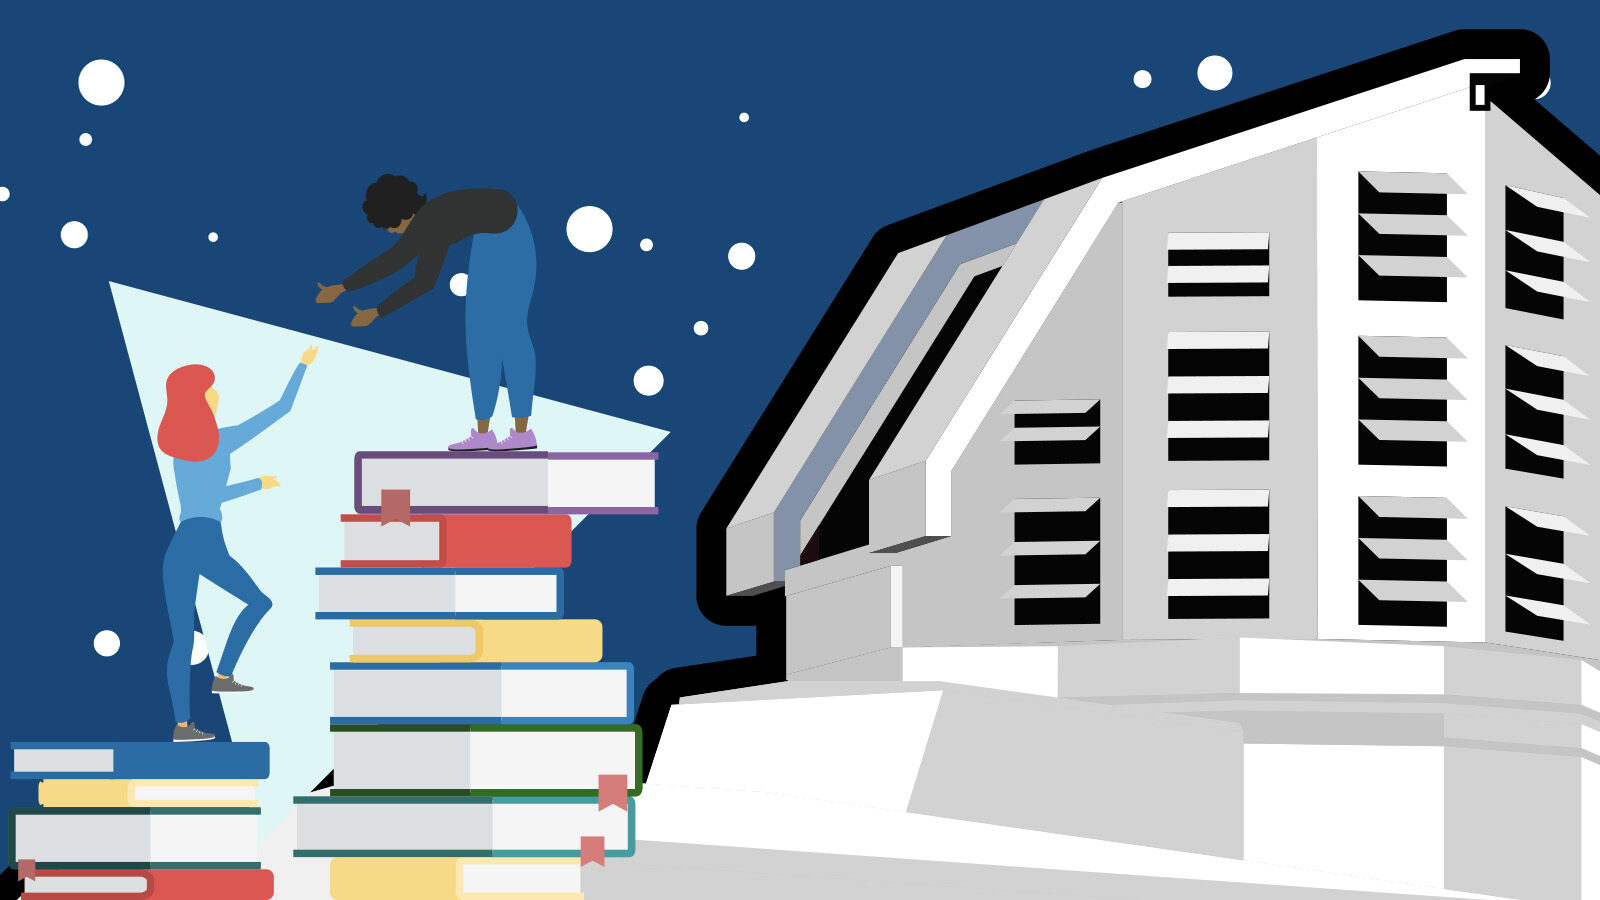 Illustration of the observatory next to people standing on stacks of books